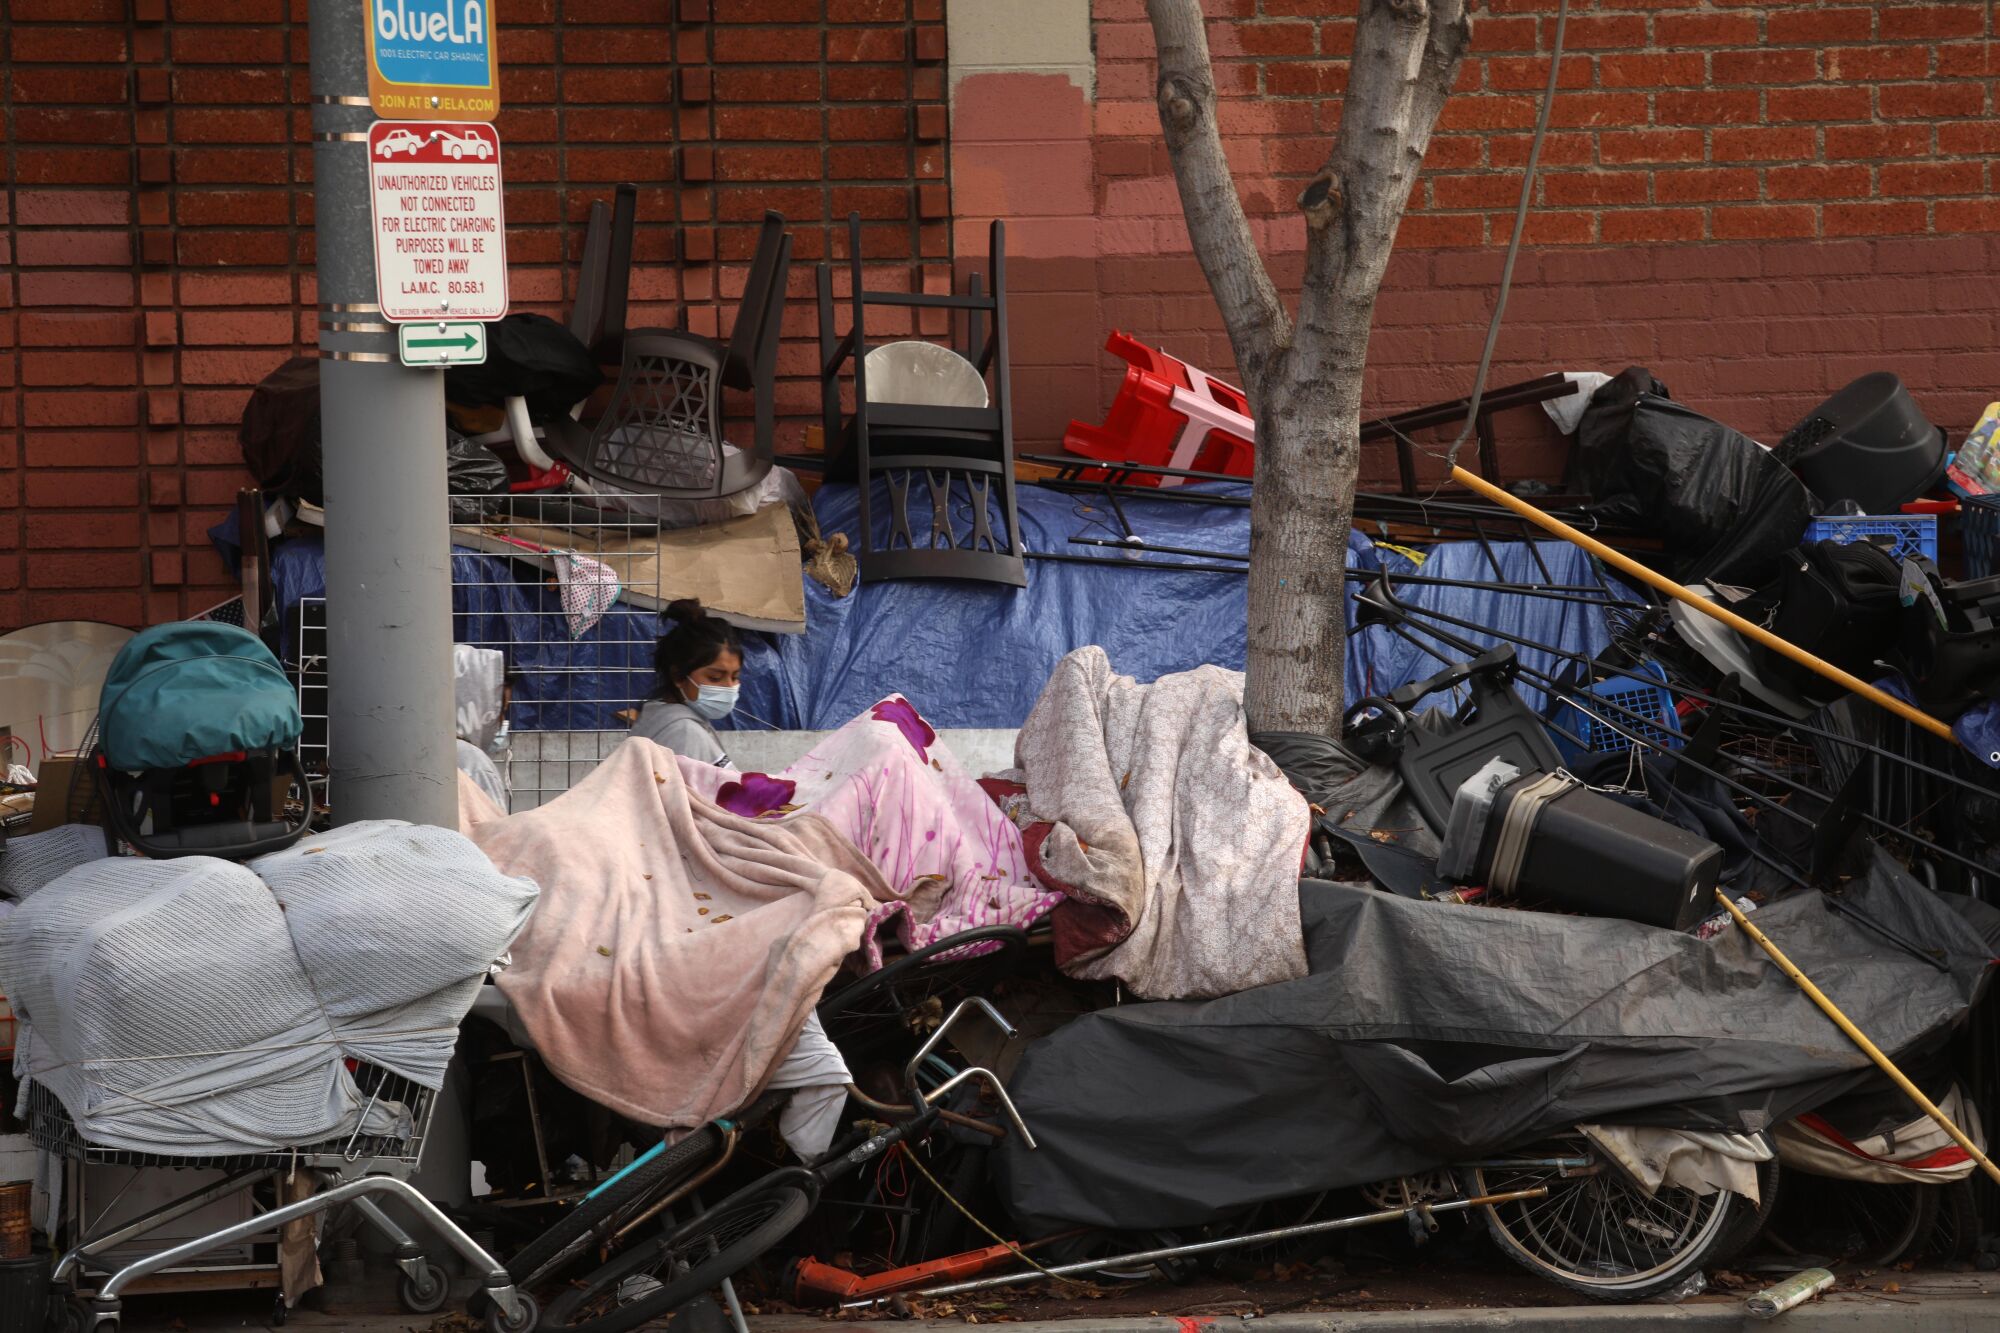 A woman's head and shoulders are visible as she walks between piles of belongings at a sidewalk homeless camp